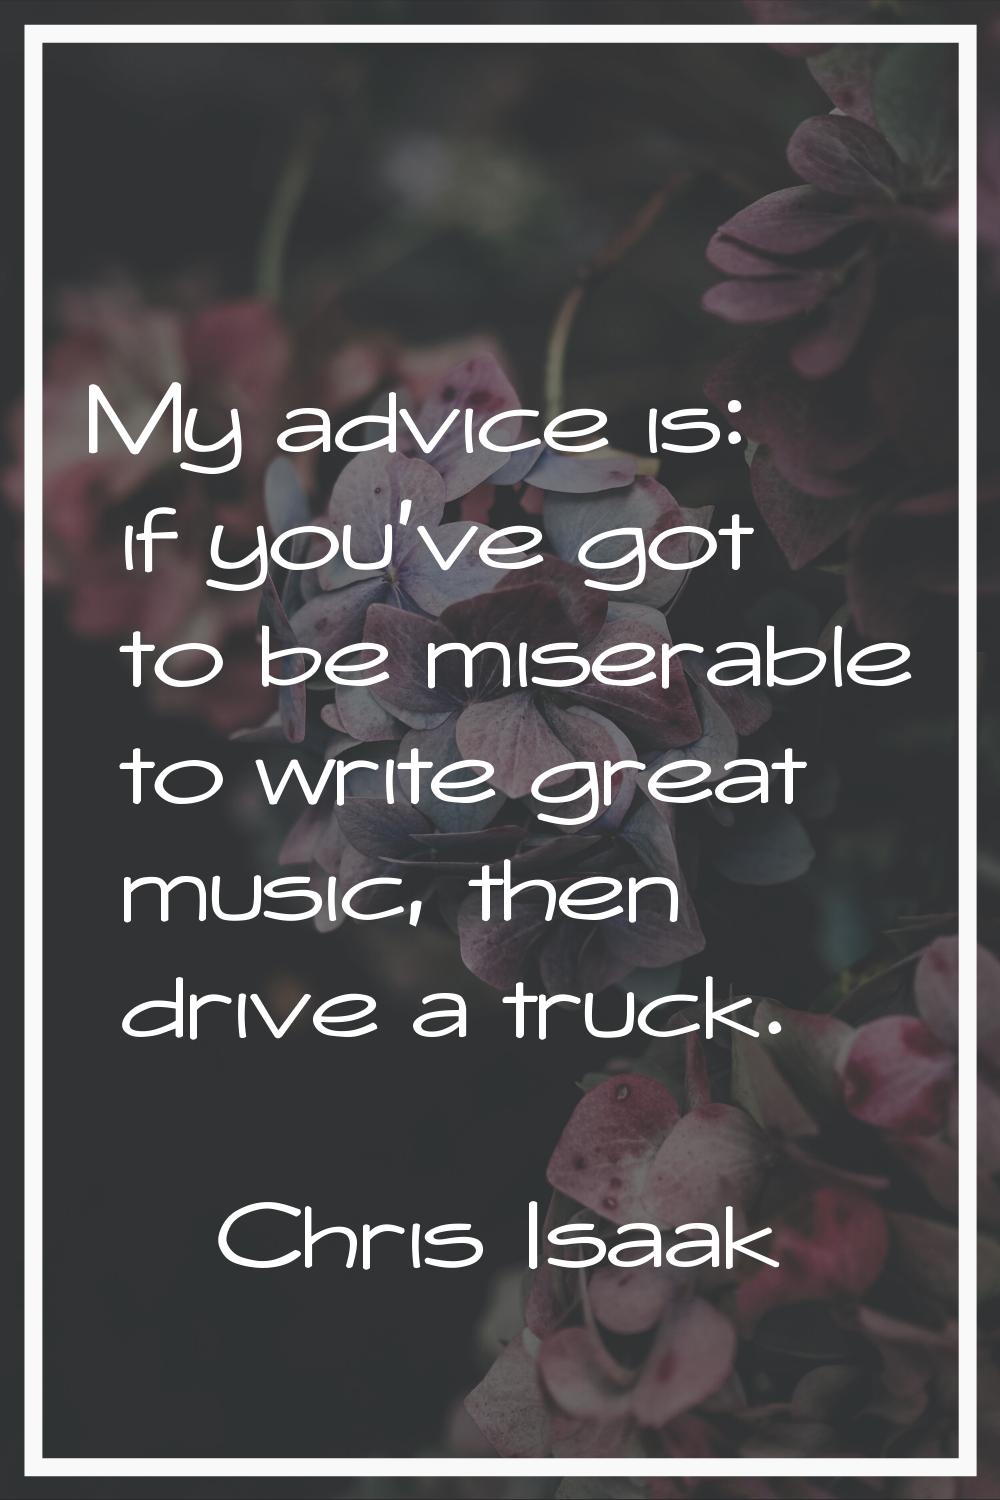 My advice is: if you've got to be miserable to write great music, then drive a truck.